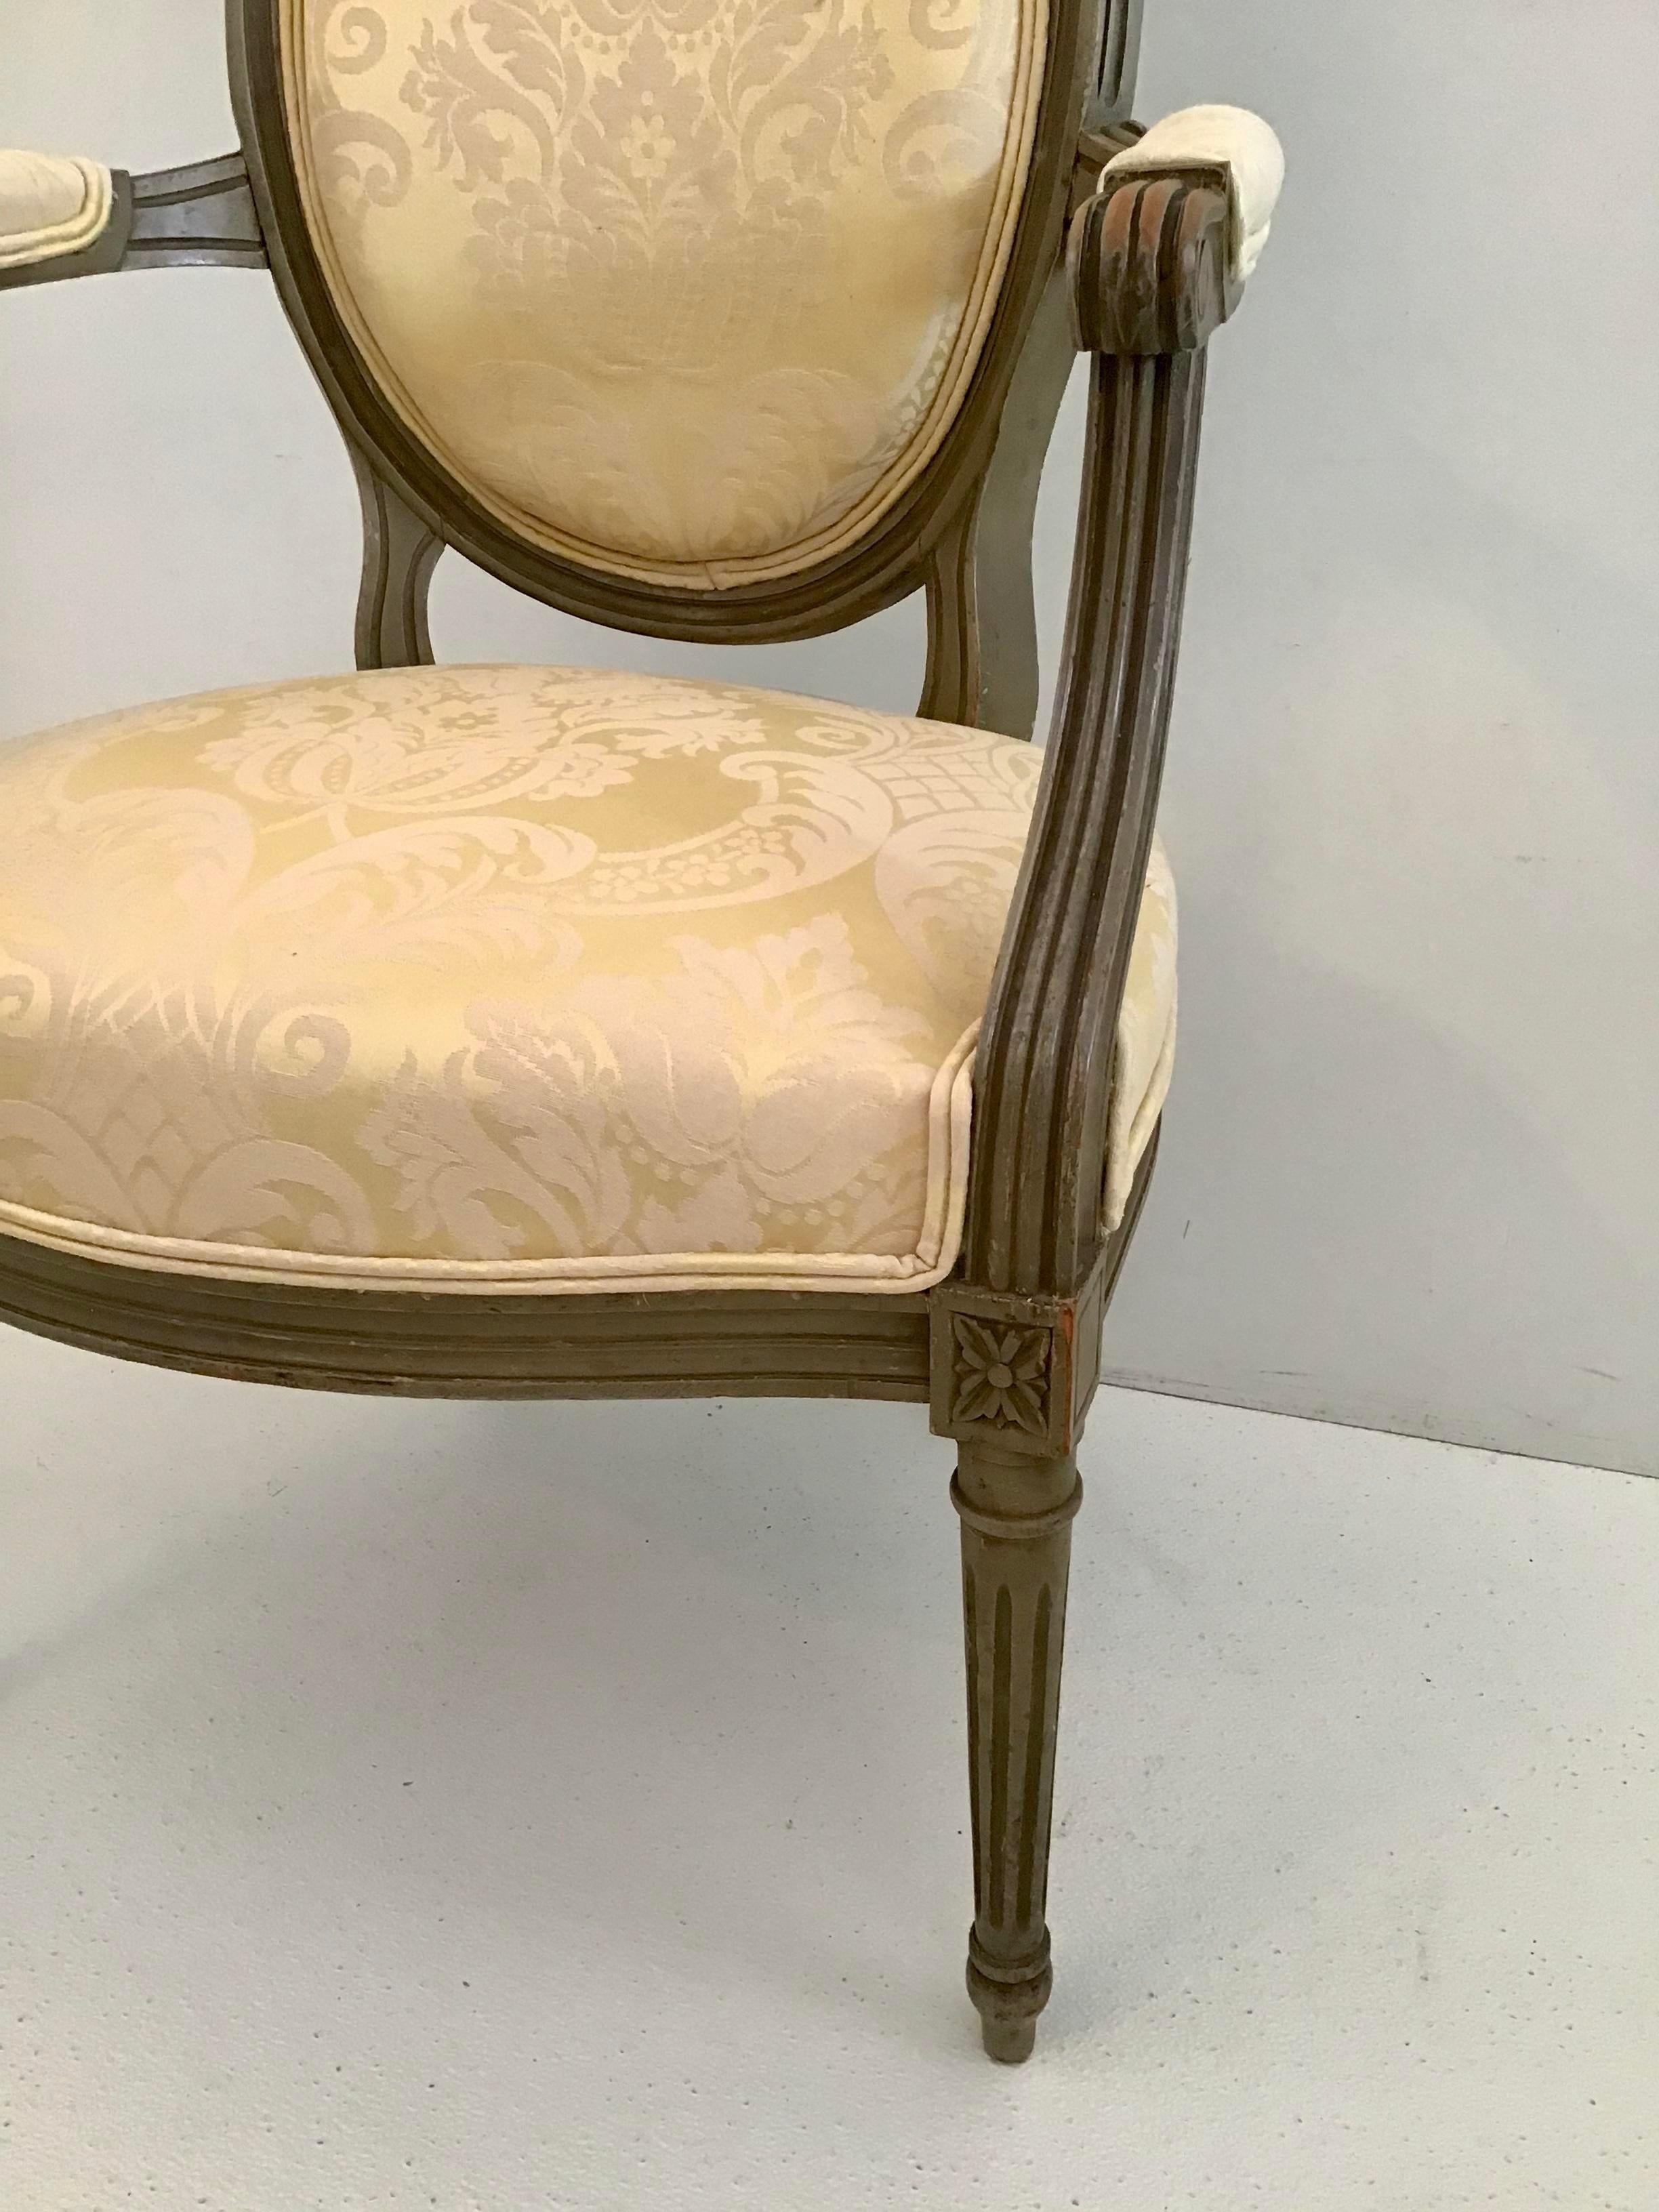 French Bronze Louis XVI Fauteuils in New Yellow Damask Upholstery, a Pair For Sale 5